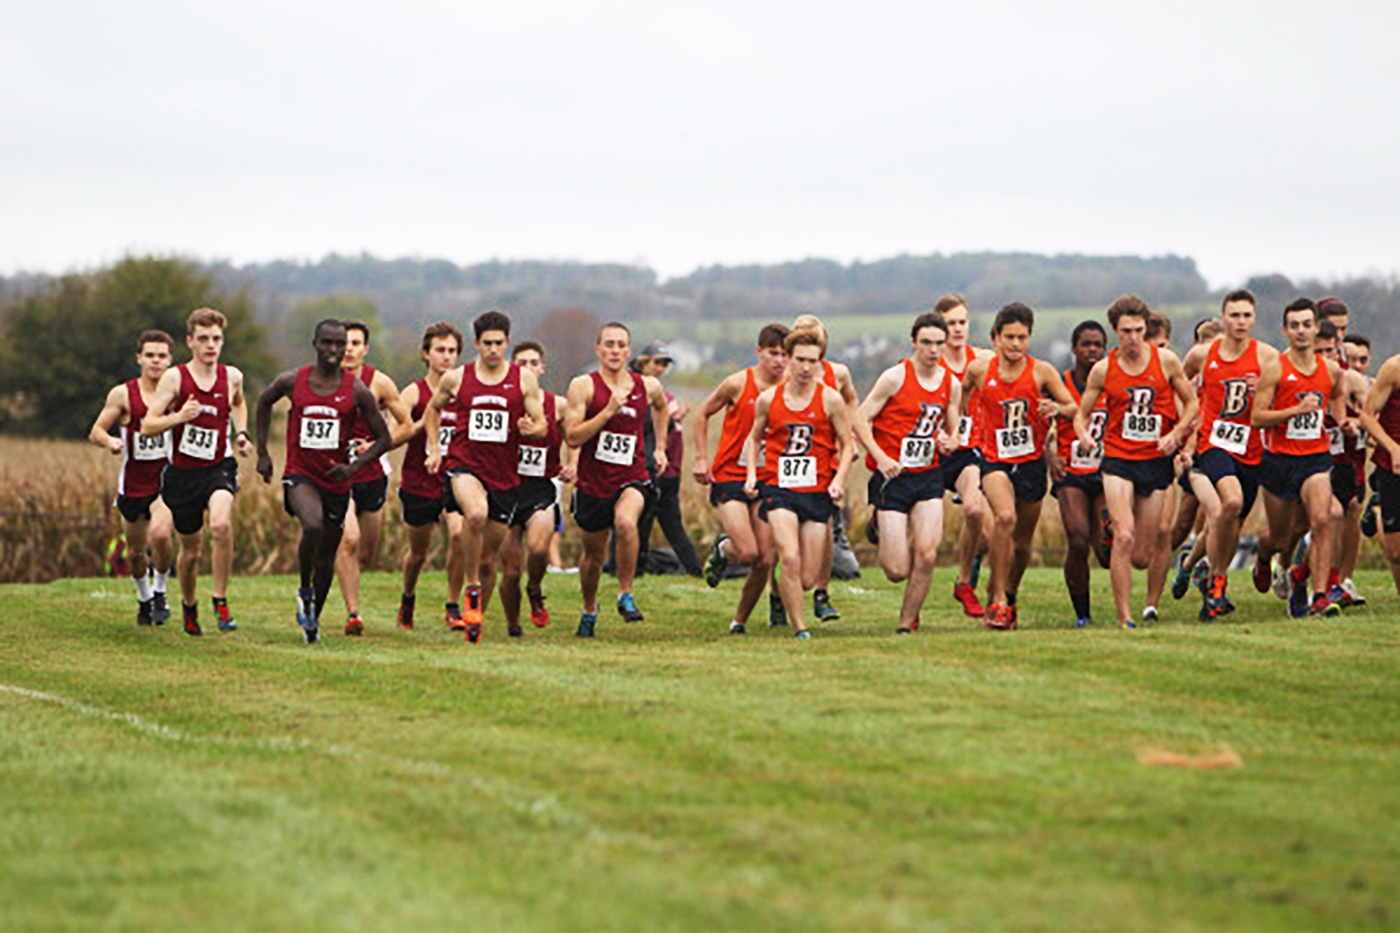 Cross Country concludes their season at NCAA Regionals The Lafayette